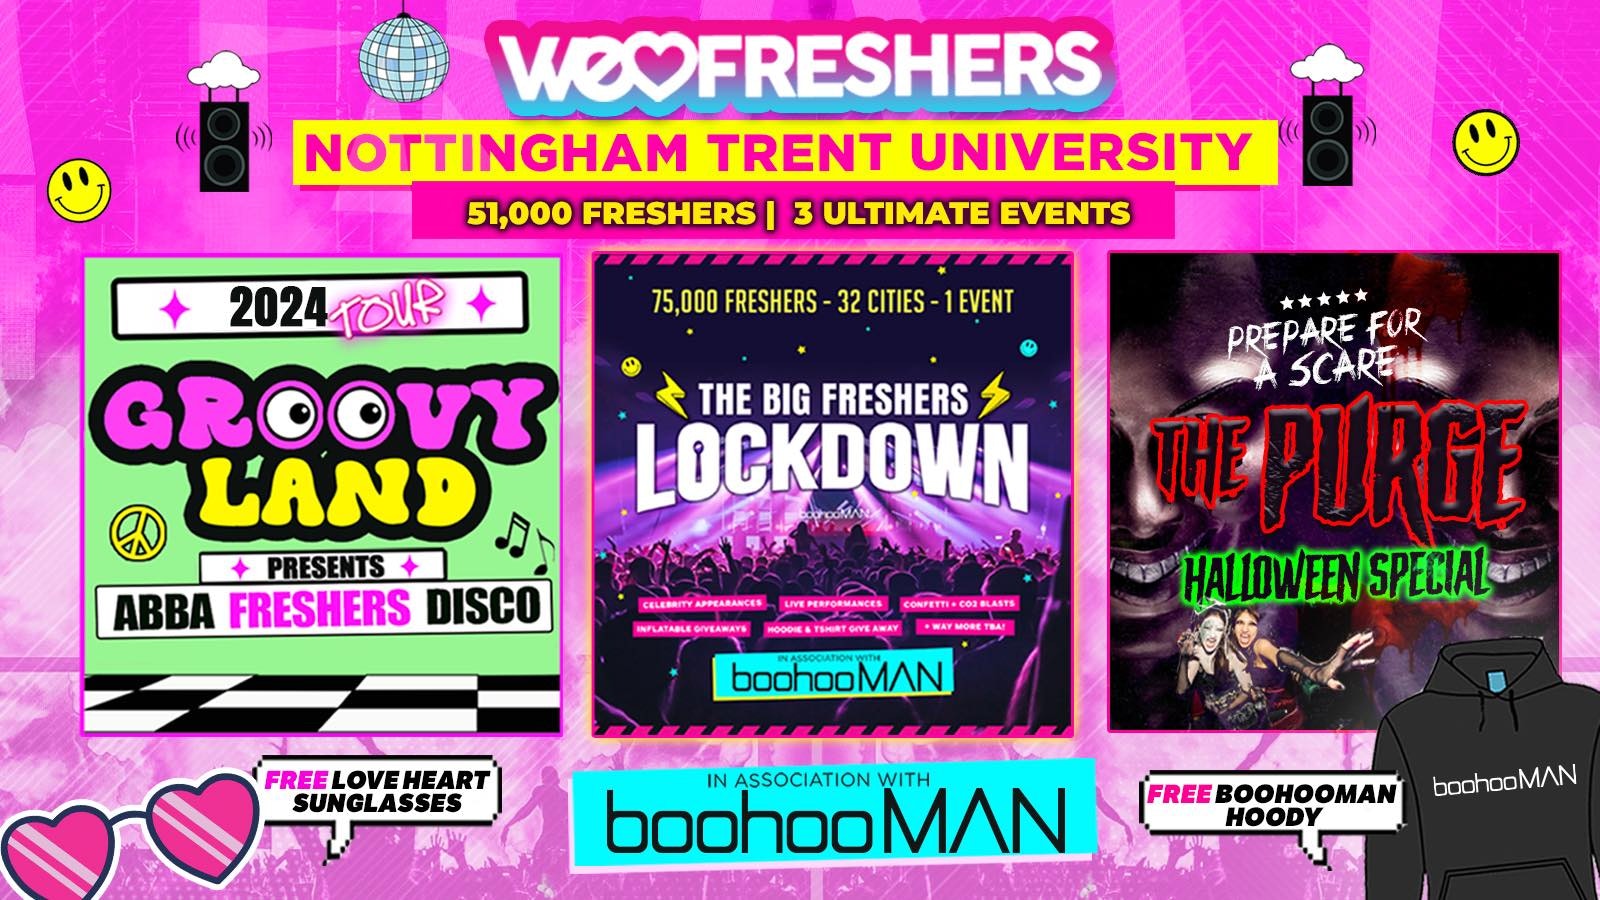 WE LOVE NOTTINGHAM NTU FRESHERS 2024 in association with boohooMAN – 3 EVENTS❗